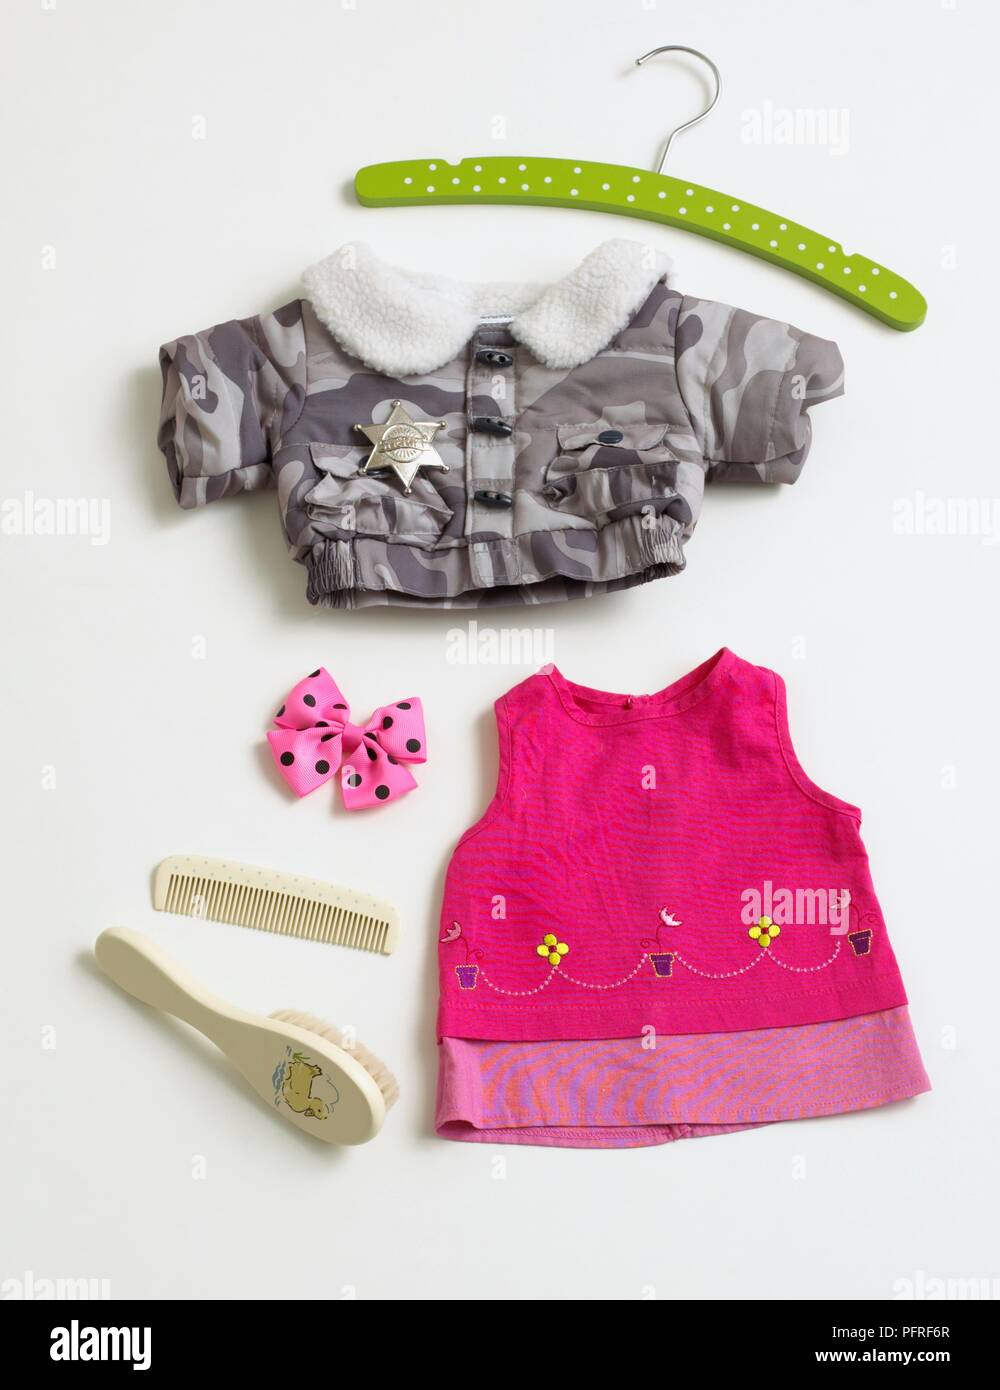 Baby clothing including dress, jacket, coat hanger and personal accessories Stock Photo